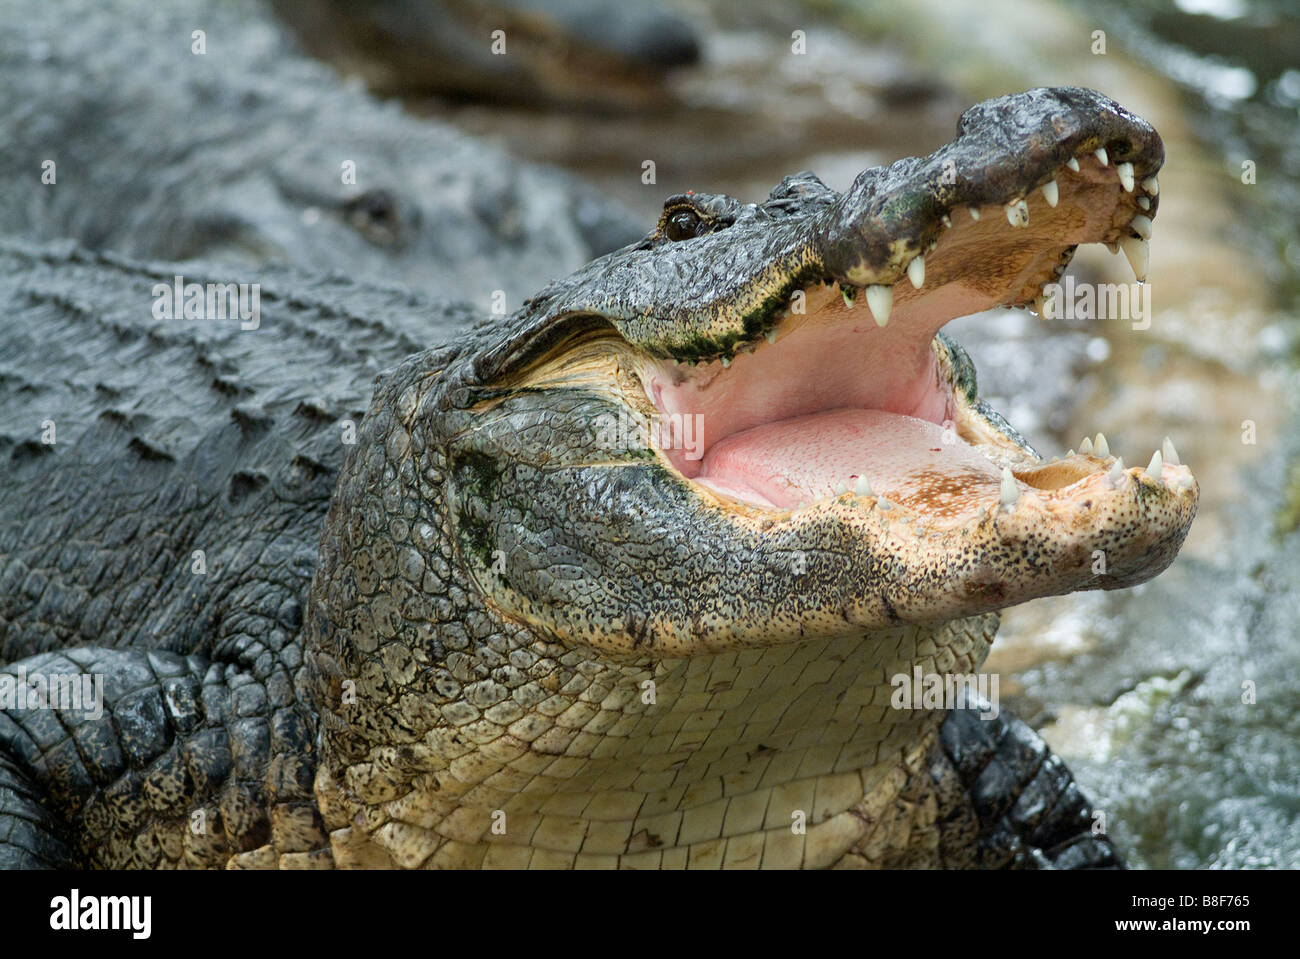 American Alligator Alligator mississippiensis with mouth open showing teeth Florida Stock Photo